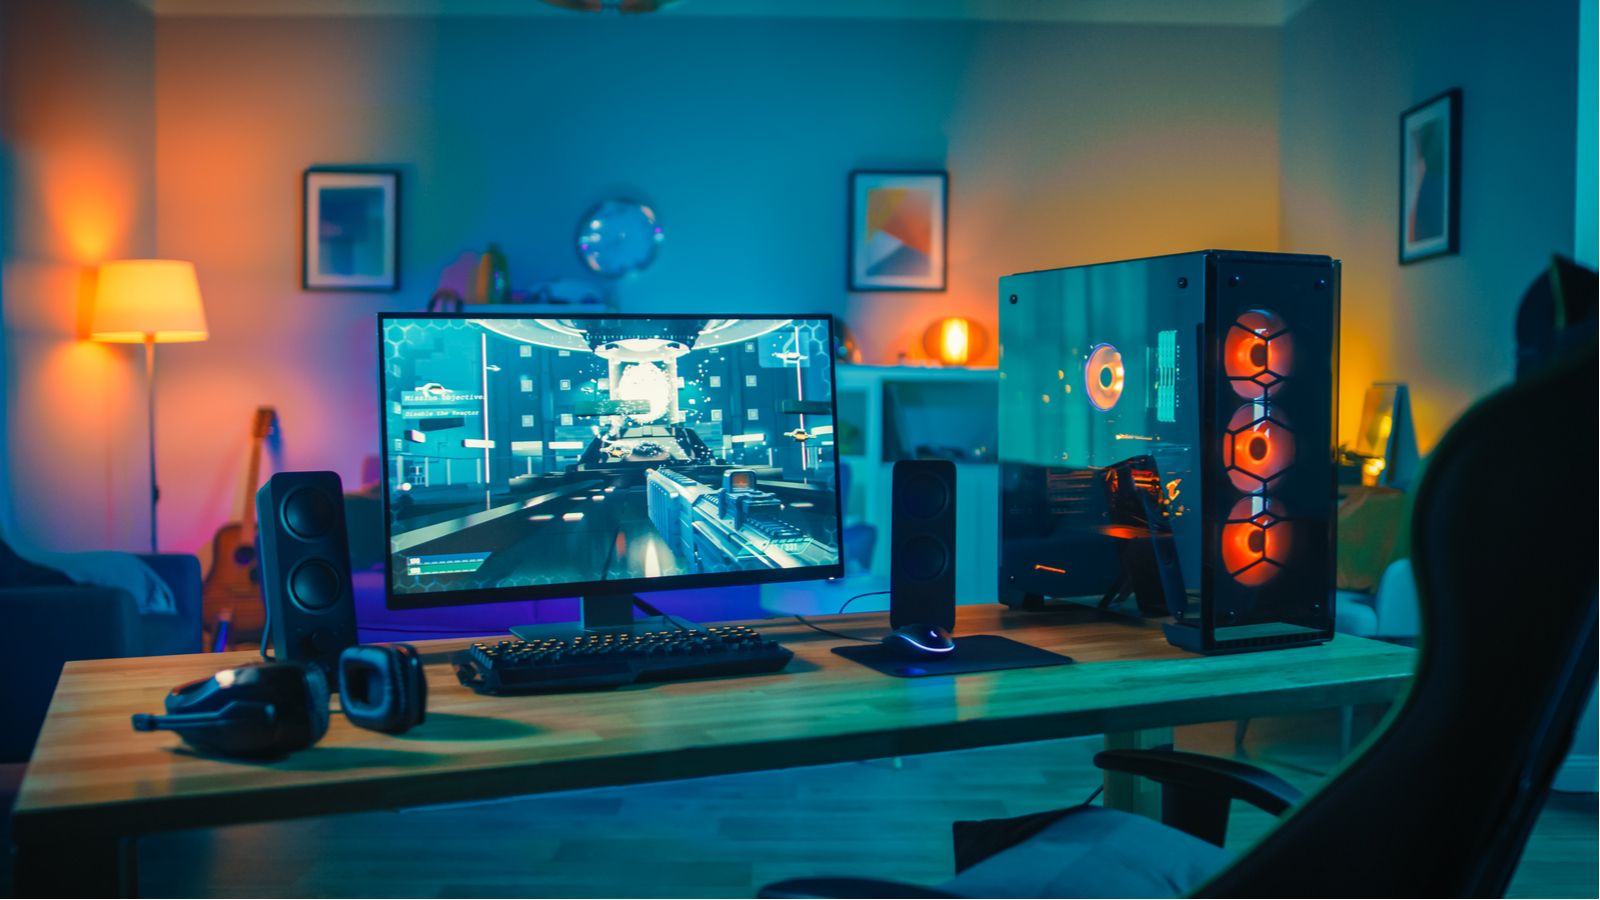 The Beginners Guide to PC Gaming